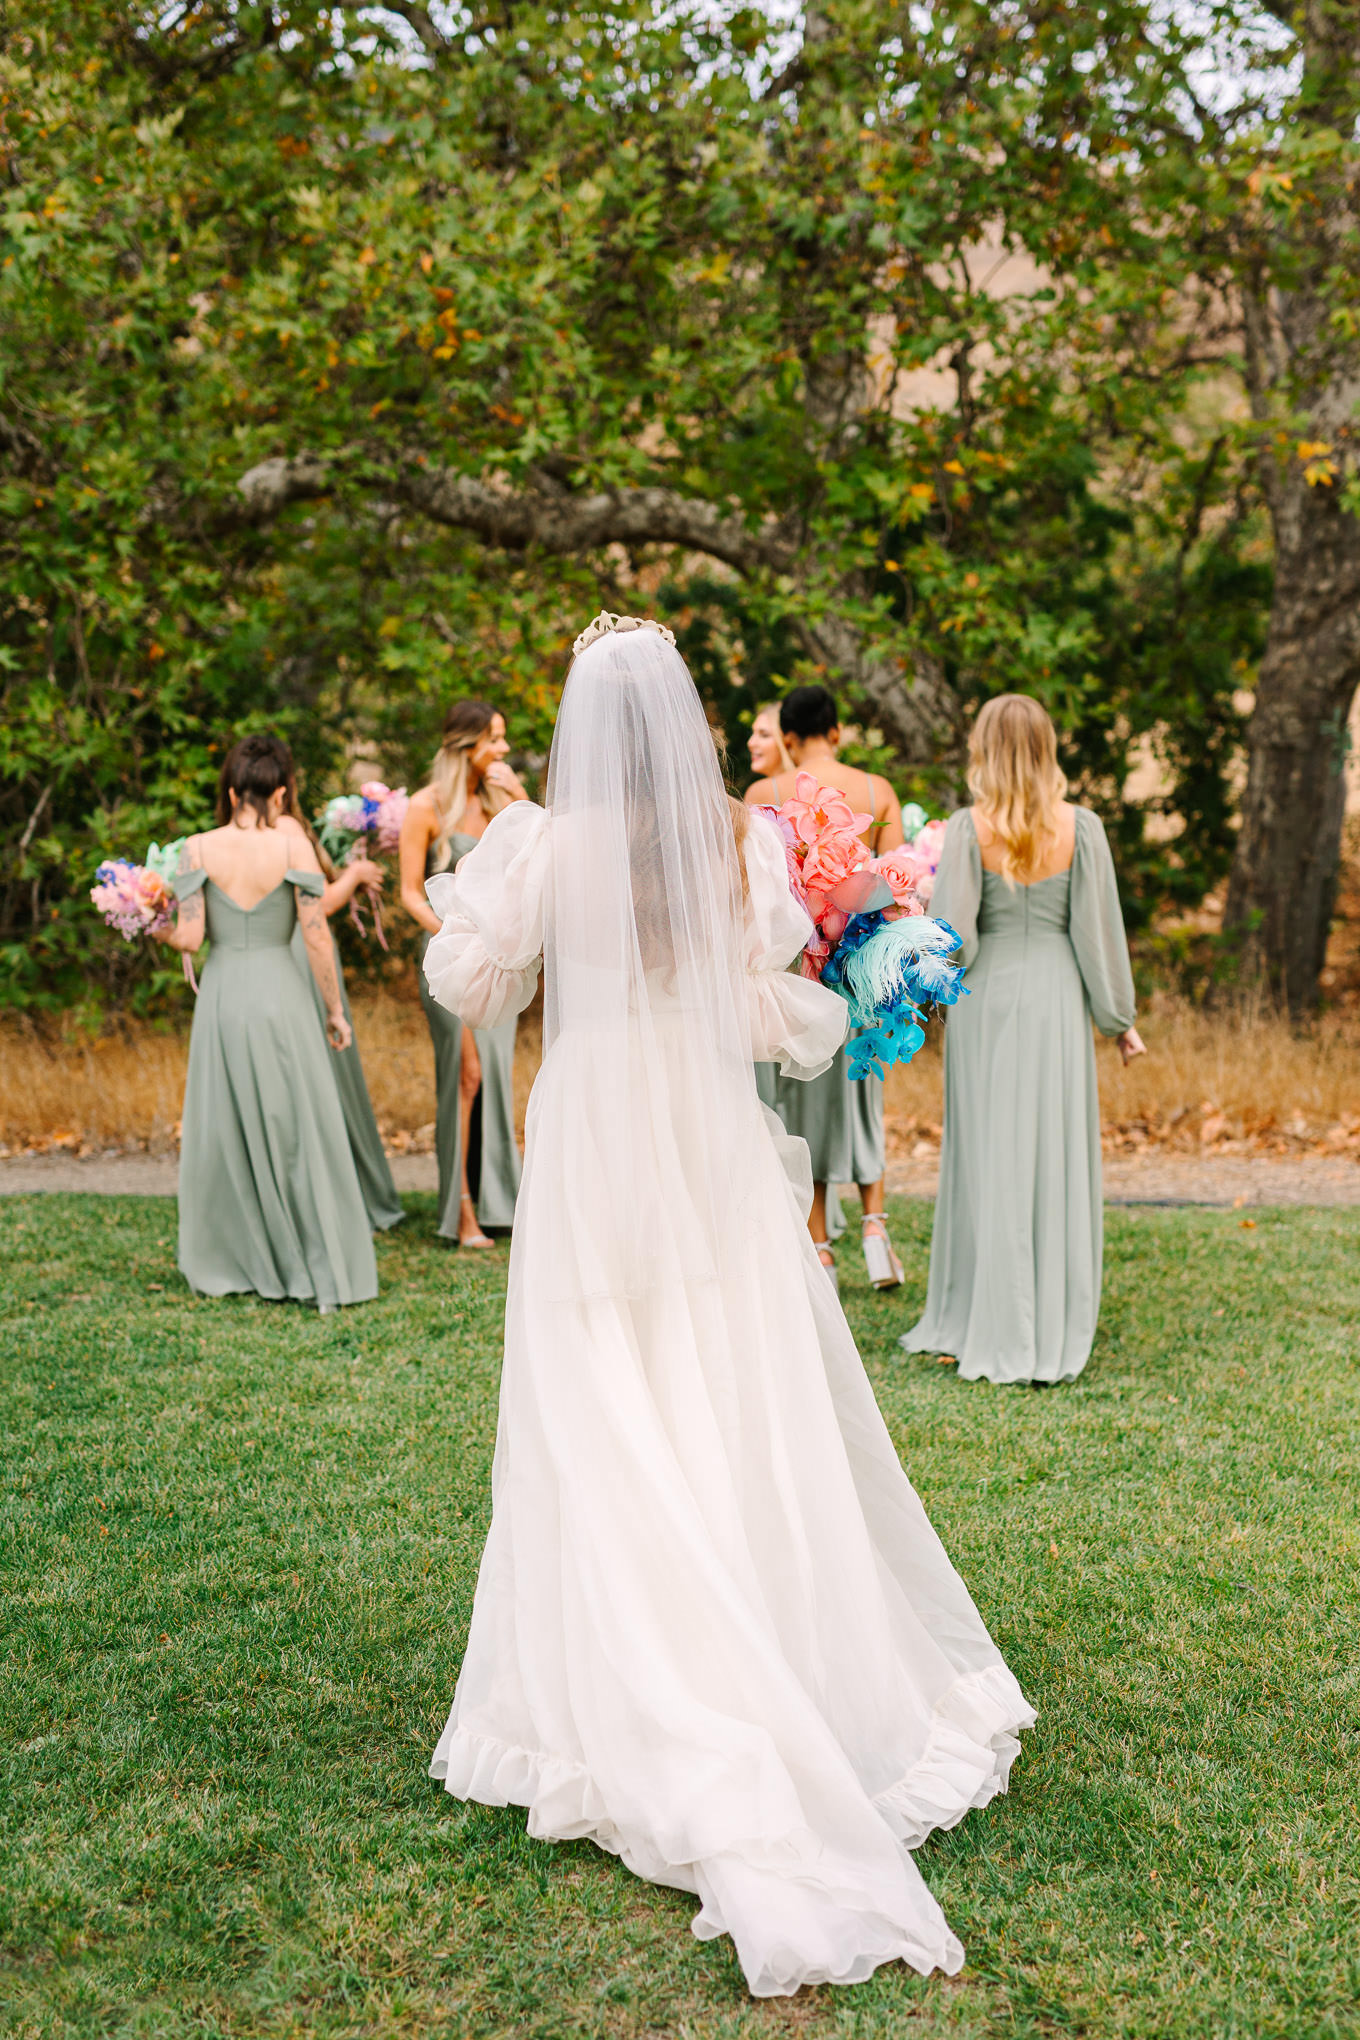 Bridesmaids in sage green gowns with colorful bouquets | Colorful and quirky wedding at Higuera Ranch in San Luis Obispo | #sanluisobispowedding #californiawedding #higueraranch #madonnainn   
Source: Mary Costa Photography | Los Angeles